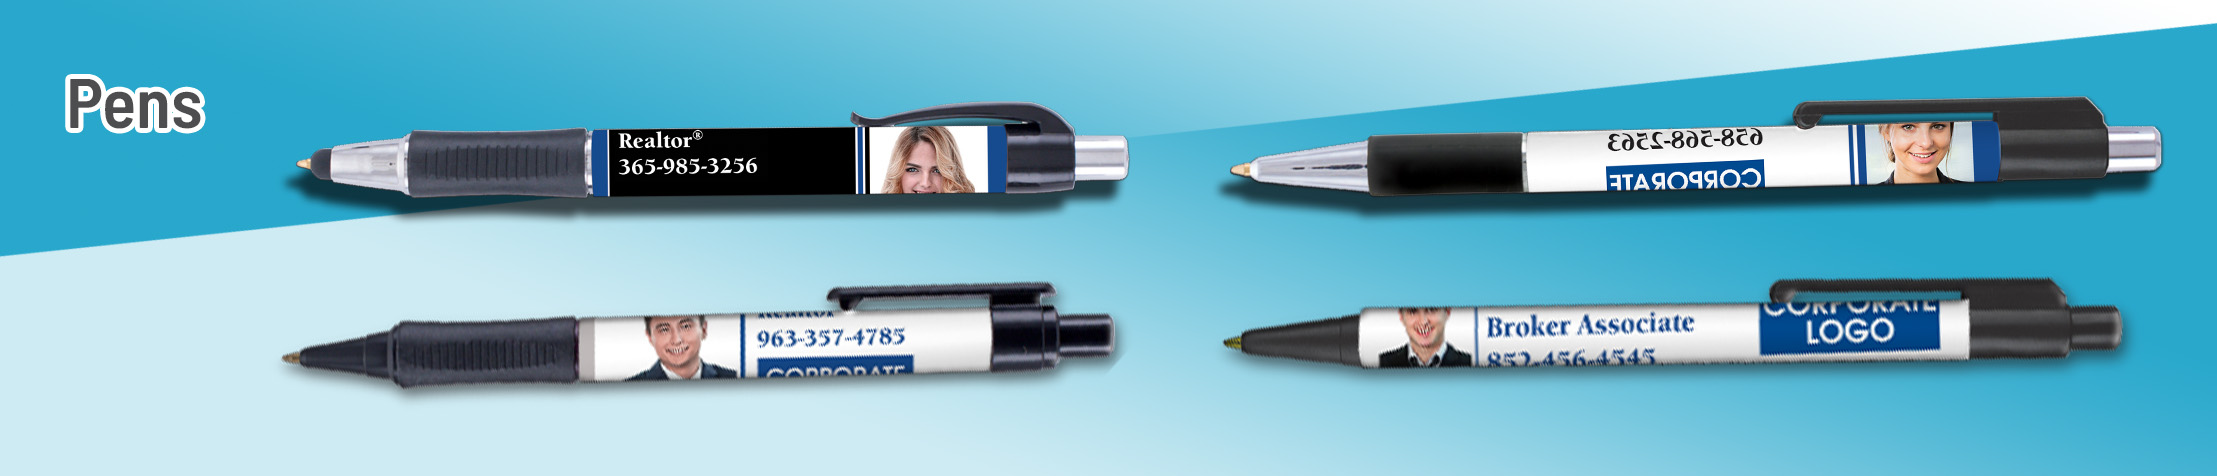 Coldwell Banker Real Estate Pens - CB personalized realtor promotional products | Sparkprint.com